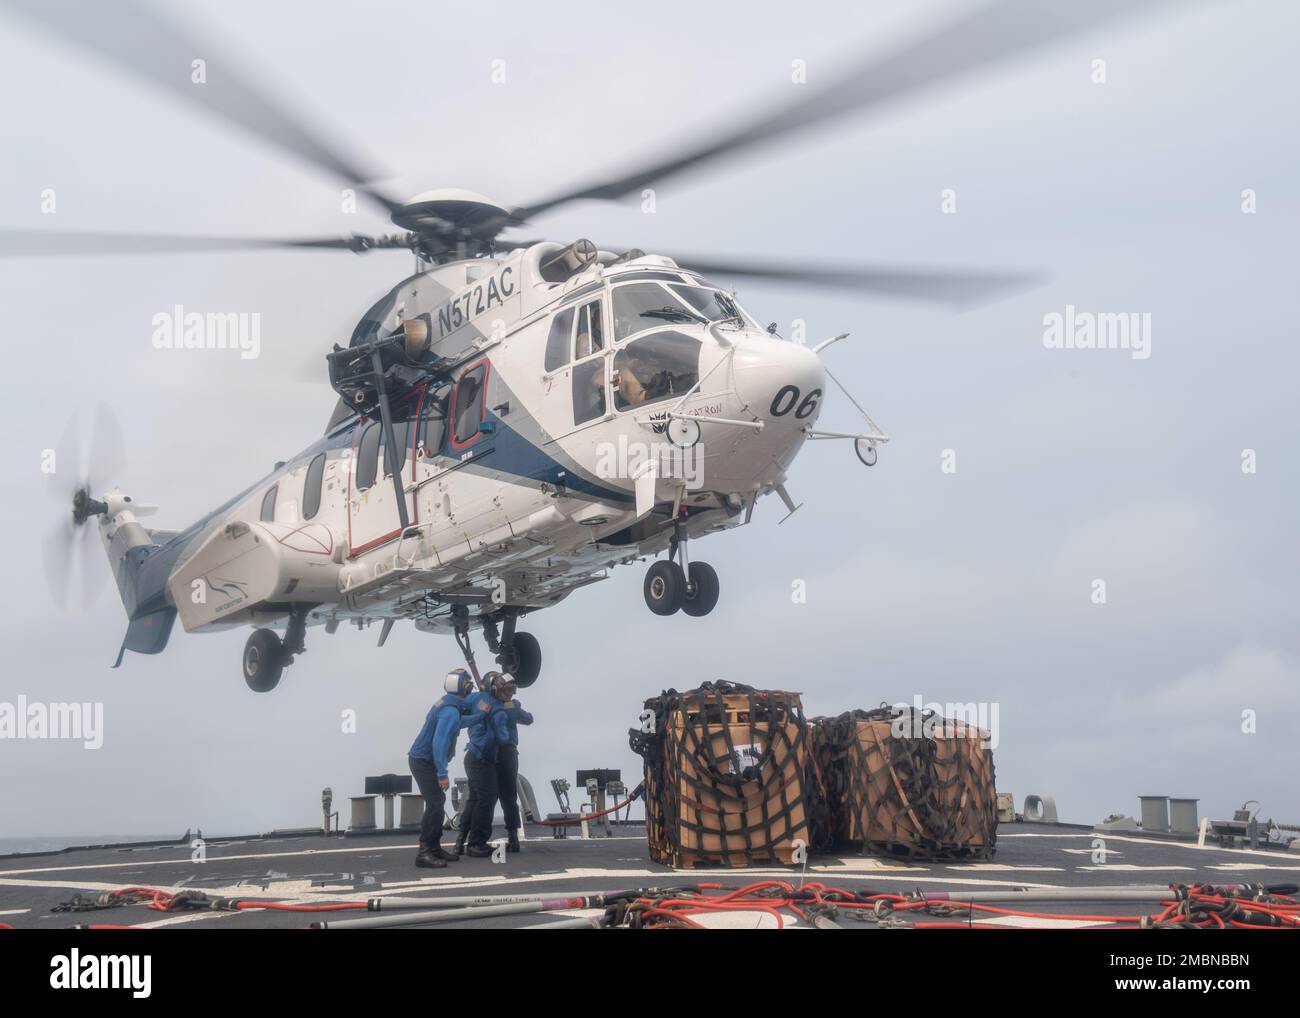 220617-N-VF045-1165   NORTH PACIFIC OCEAN (June 17, 2022) Sailors hook up cargo to a H215 Super Puma helicopter attached to the Lewis and Clark-class dry cargo and ammunition ship USNS Cesar Chavez (T-AKE 14) on the flight deck aboard Arleigh Burke-class guided-missile destroyer USS Milius (DDG 69). Milius is assigned to Task Force 71/Destroyer Squadron (DESRON) 15, the Navy’s largest forward-deployed DESRON and the U.S. 7th fleet’s principal surface force. Stock Photo